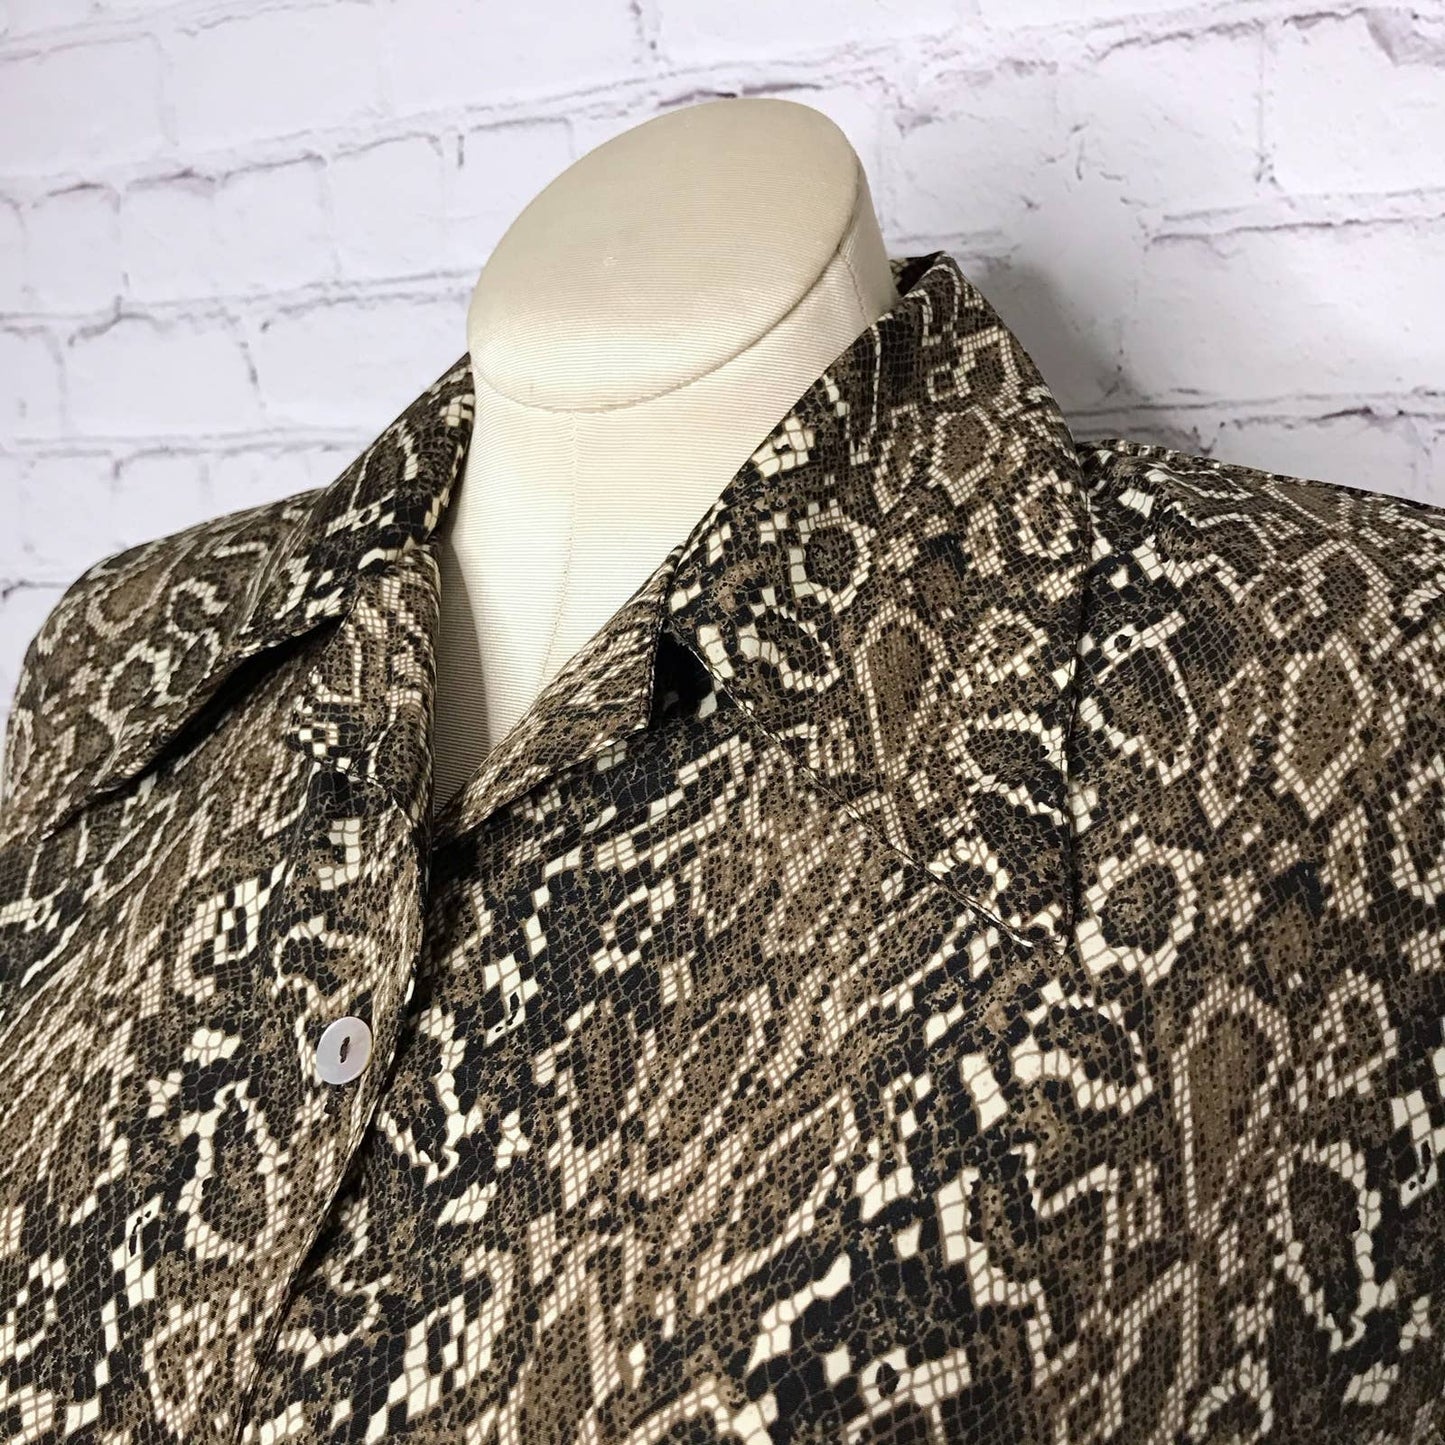 Vintage 90s Snake Print Button Down Blouse Short Sleeves Ship n' Shore NWT